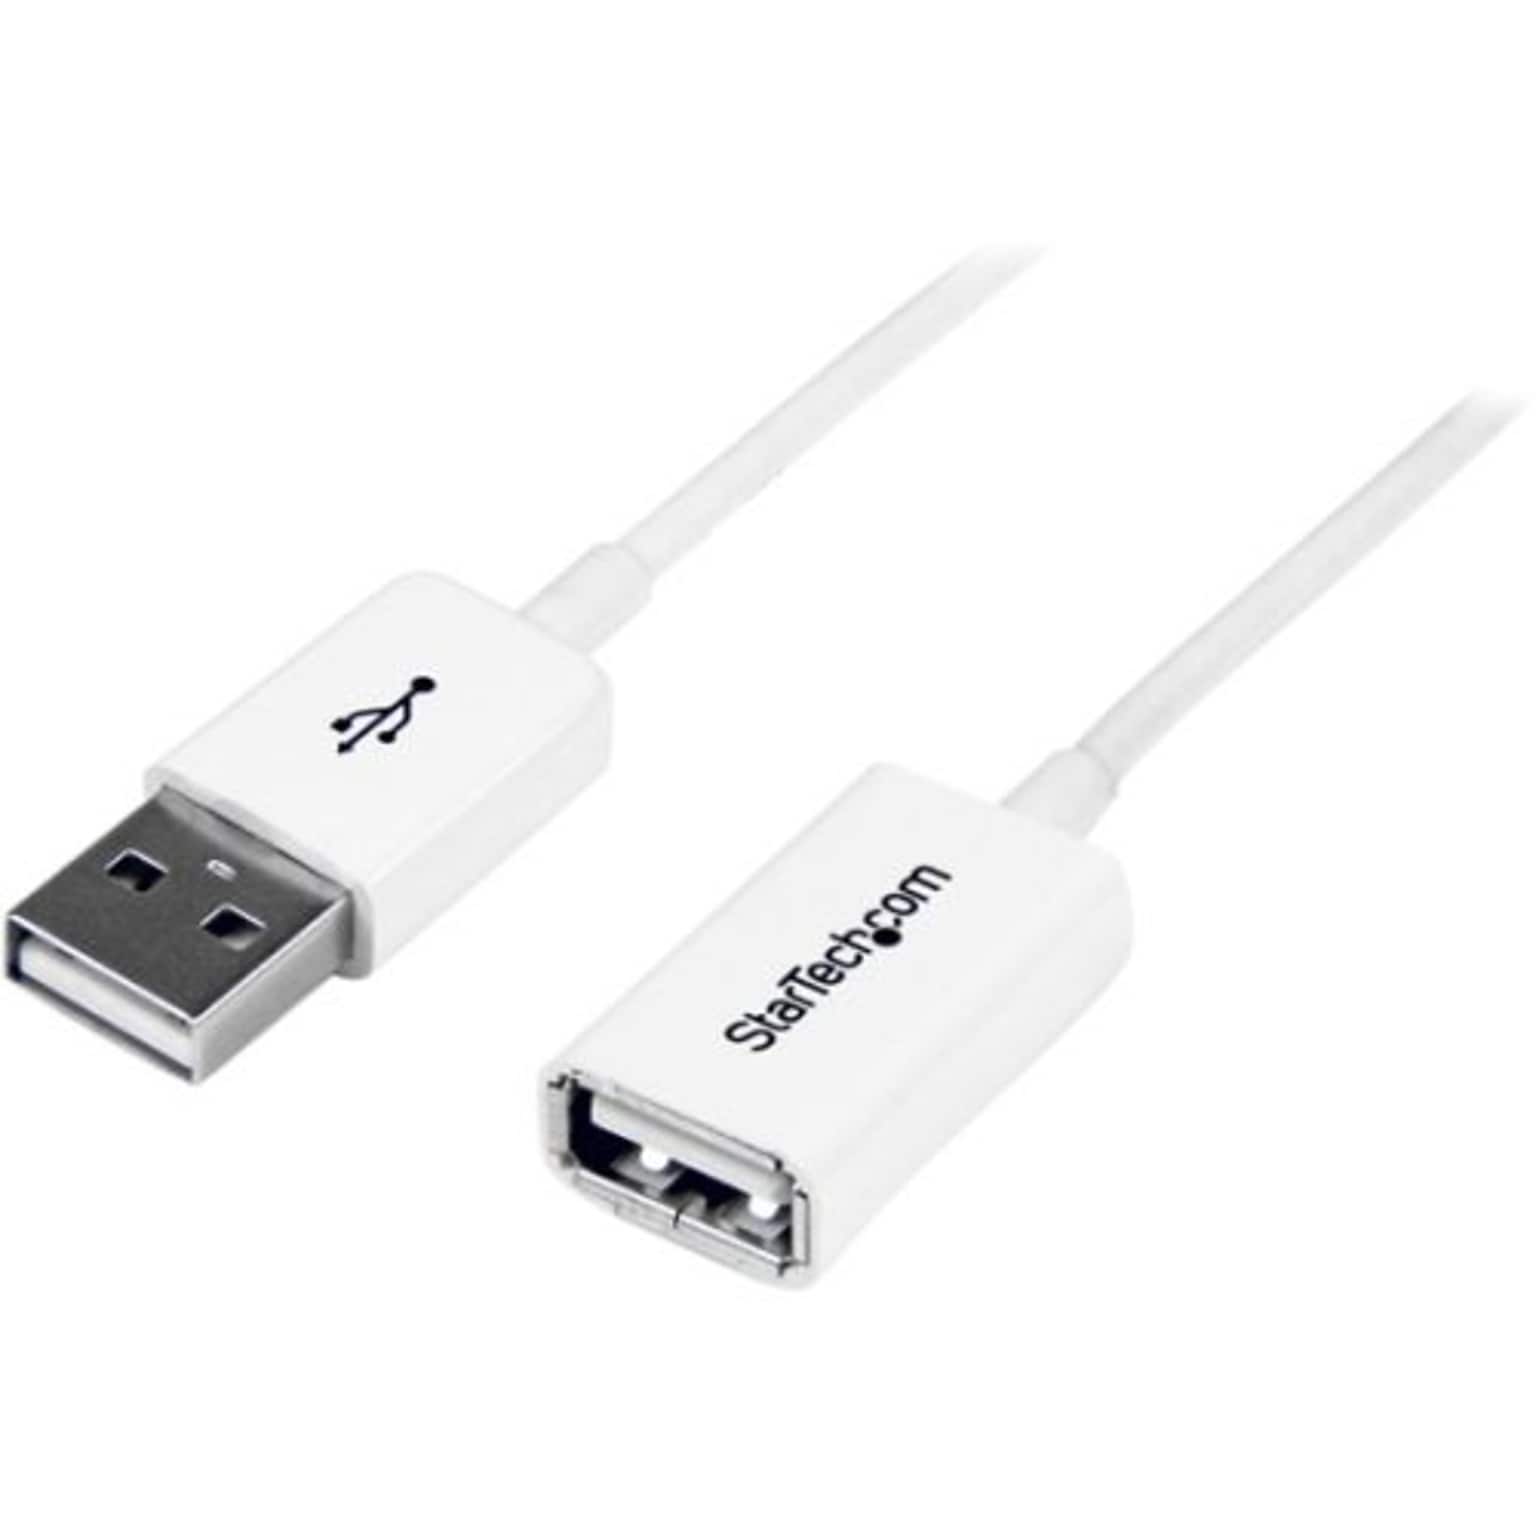 Startech 6.56 USB 2.0 A/A Extension Cable; White